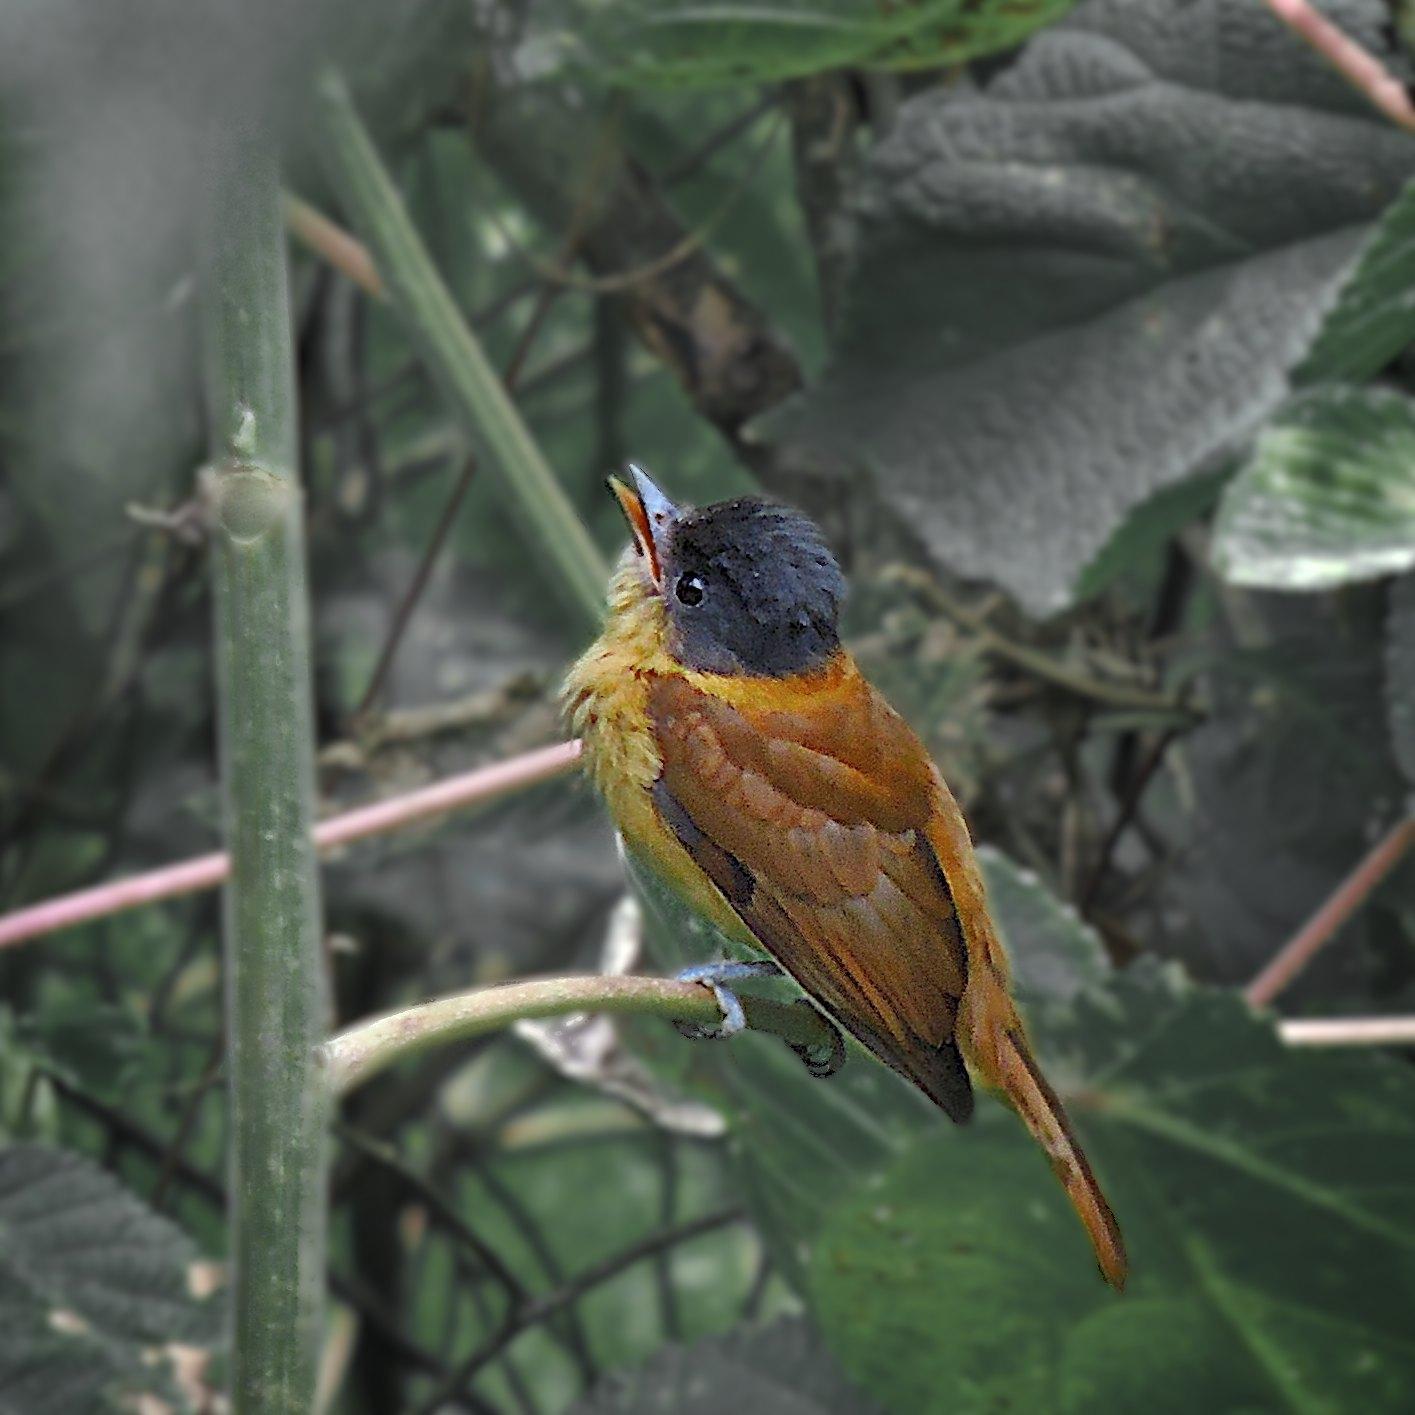 Rose-throated Becard Photo by Andres Duarte